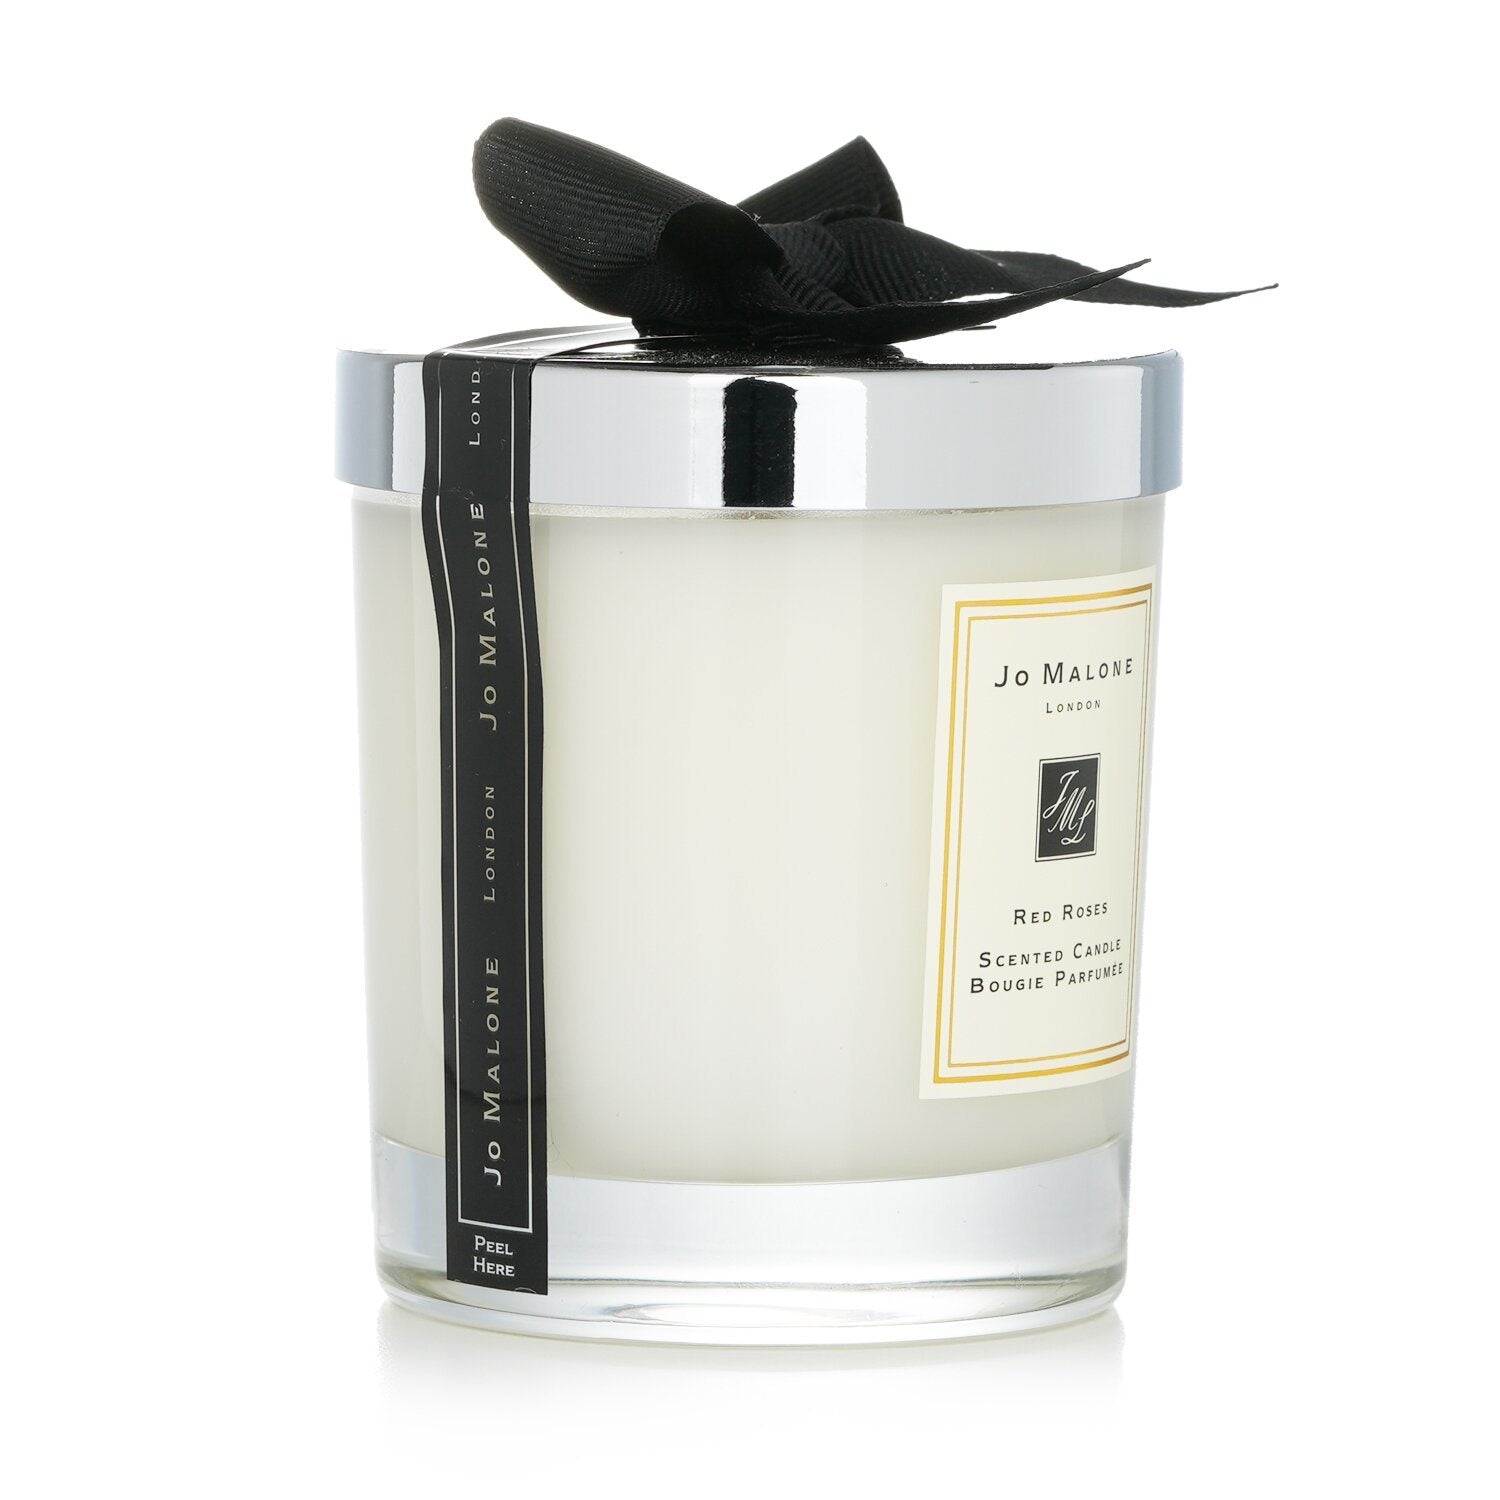 JO MALONE - Red Roses Scented Candle - 200g (2.5 inch) 3P's Inclusive Beauty